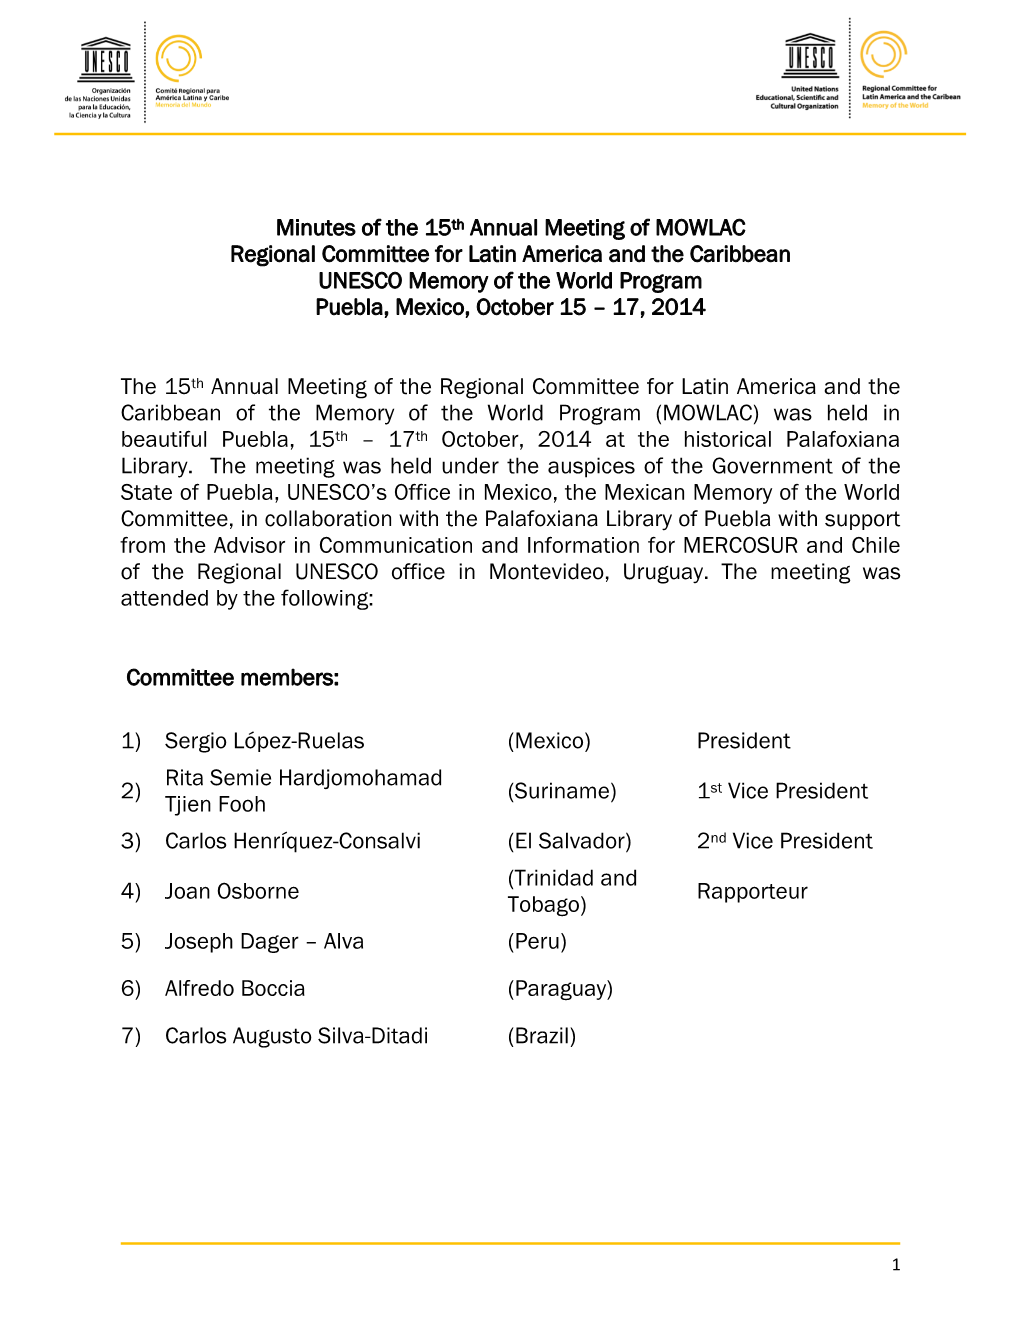 Minutes of the 15Th Annual Meeting of MOWLAC Regional Committee For